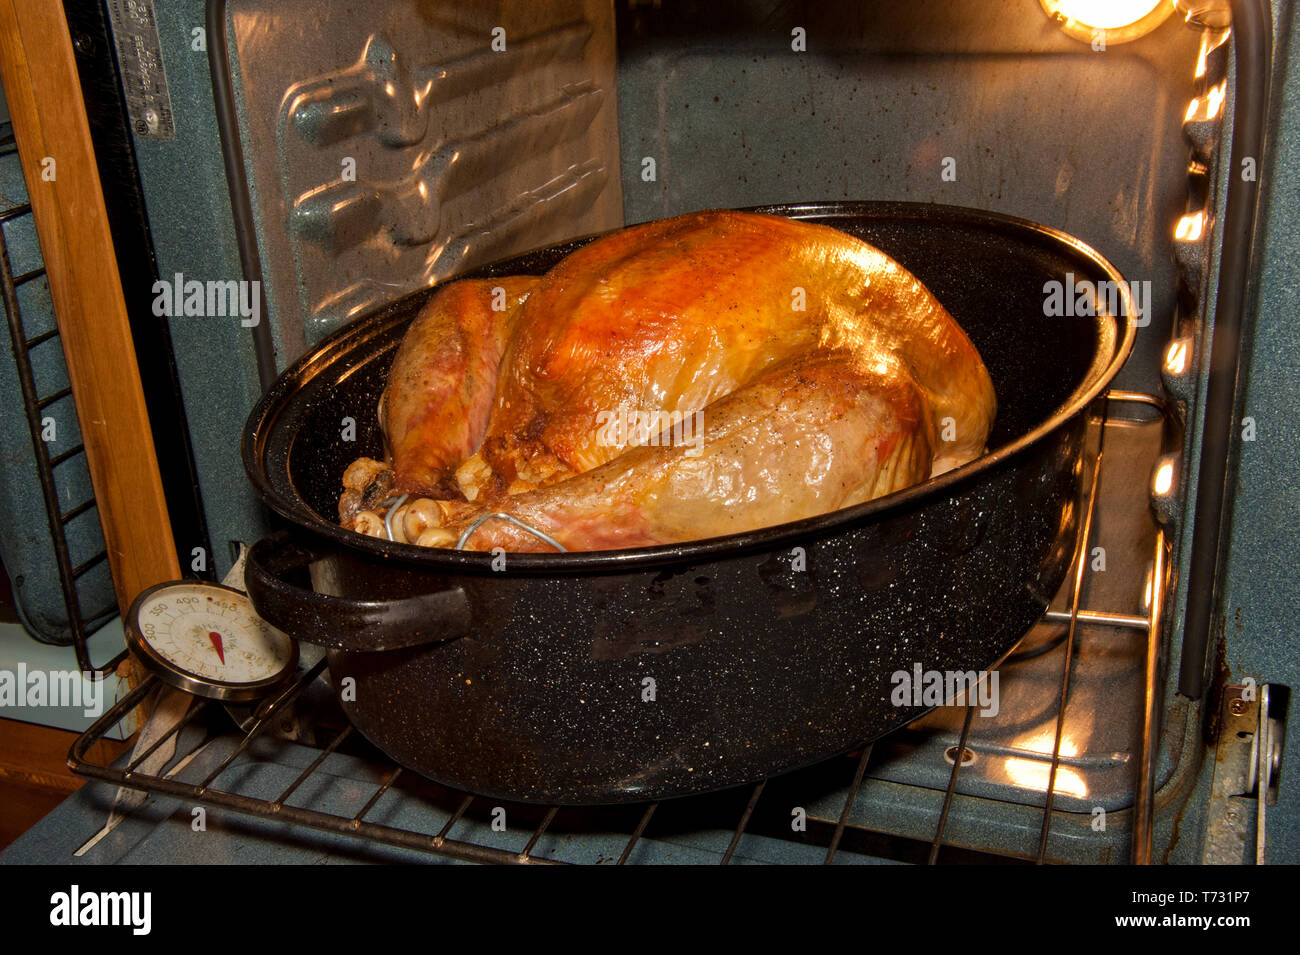 Thanksgiving Turkey in the oven Stock Photo